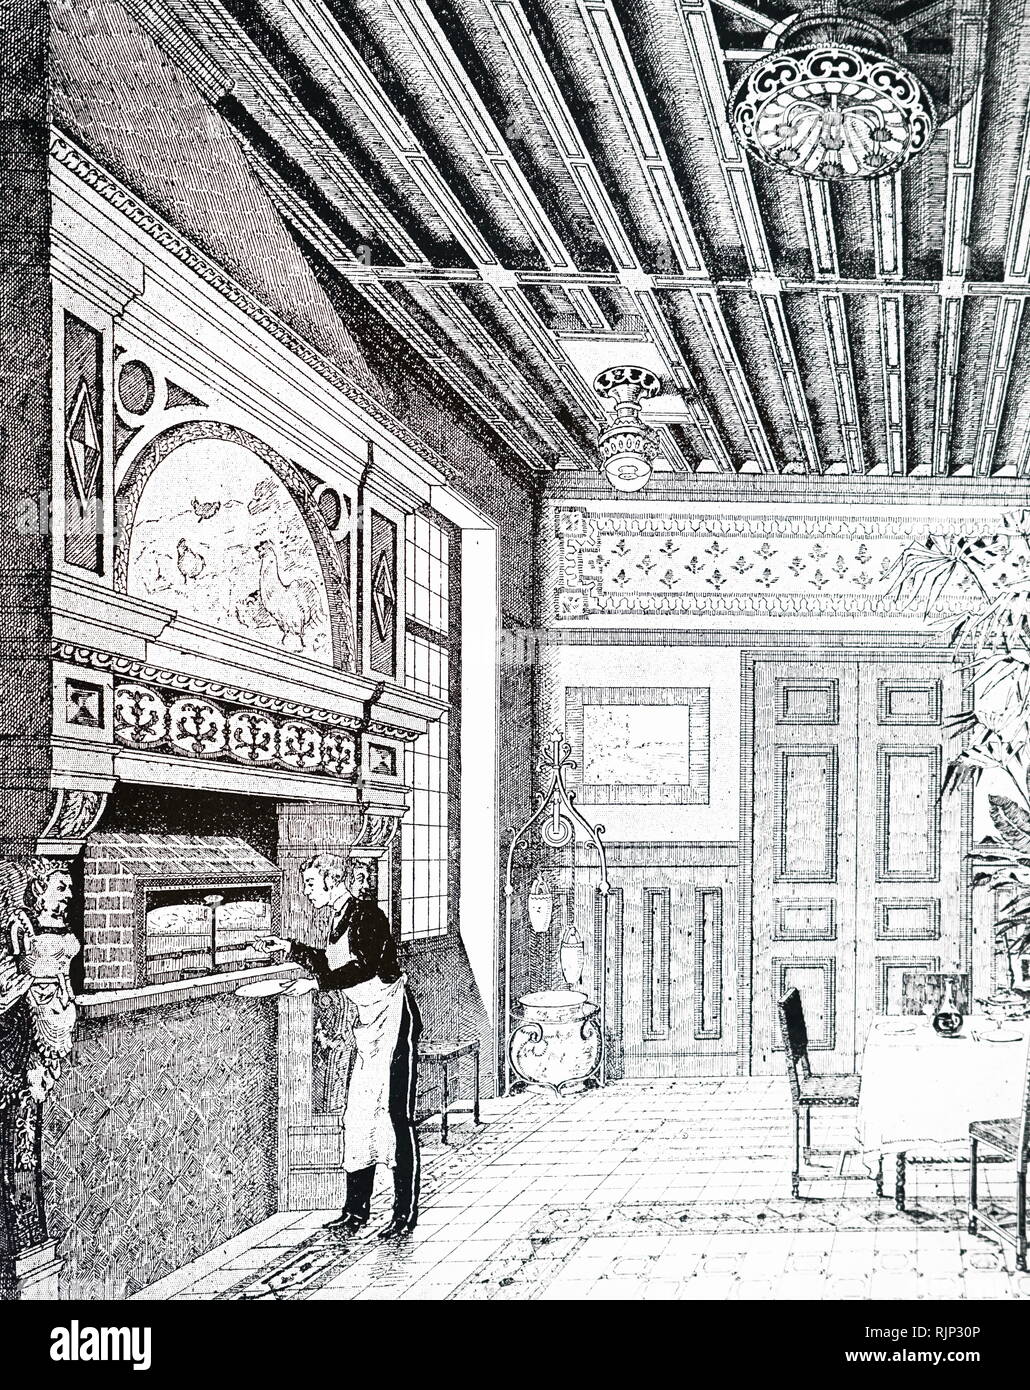 An engraving depicting the grill room in the Pavilion du Gaz at the Paris Expedition of 1889. Dated 19th century Stock Photo